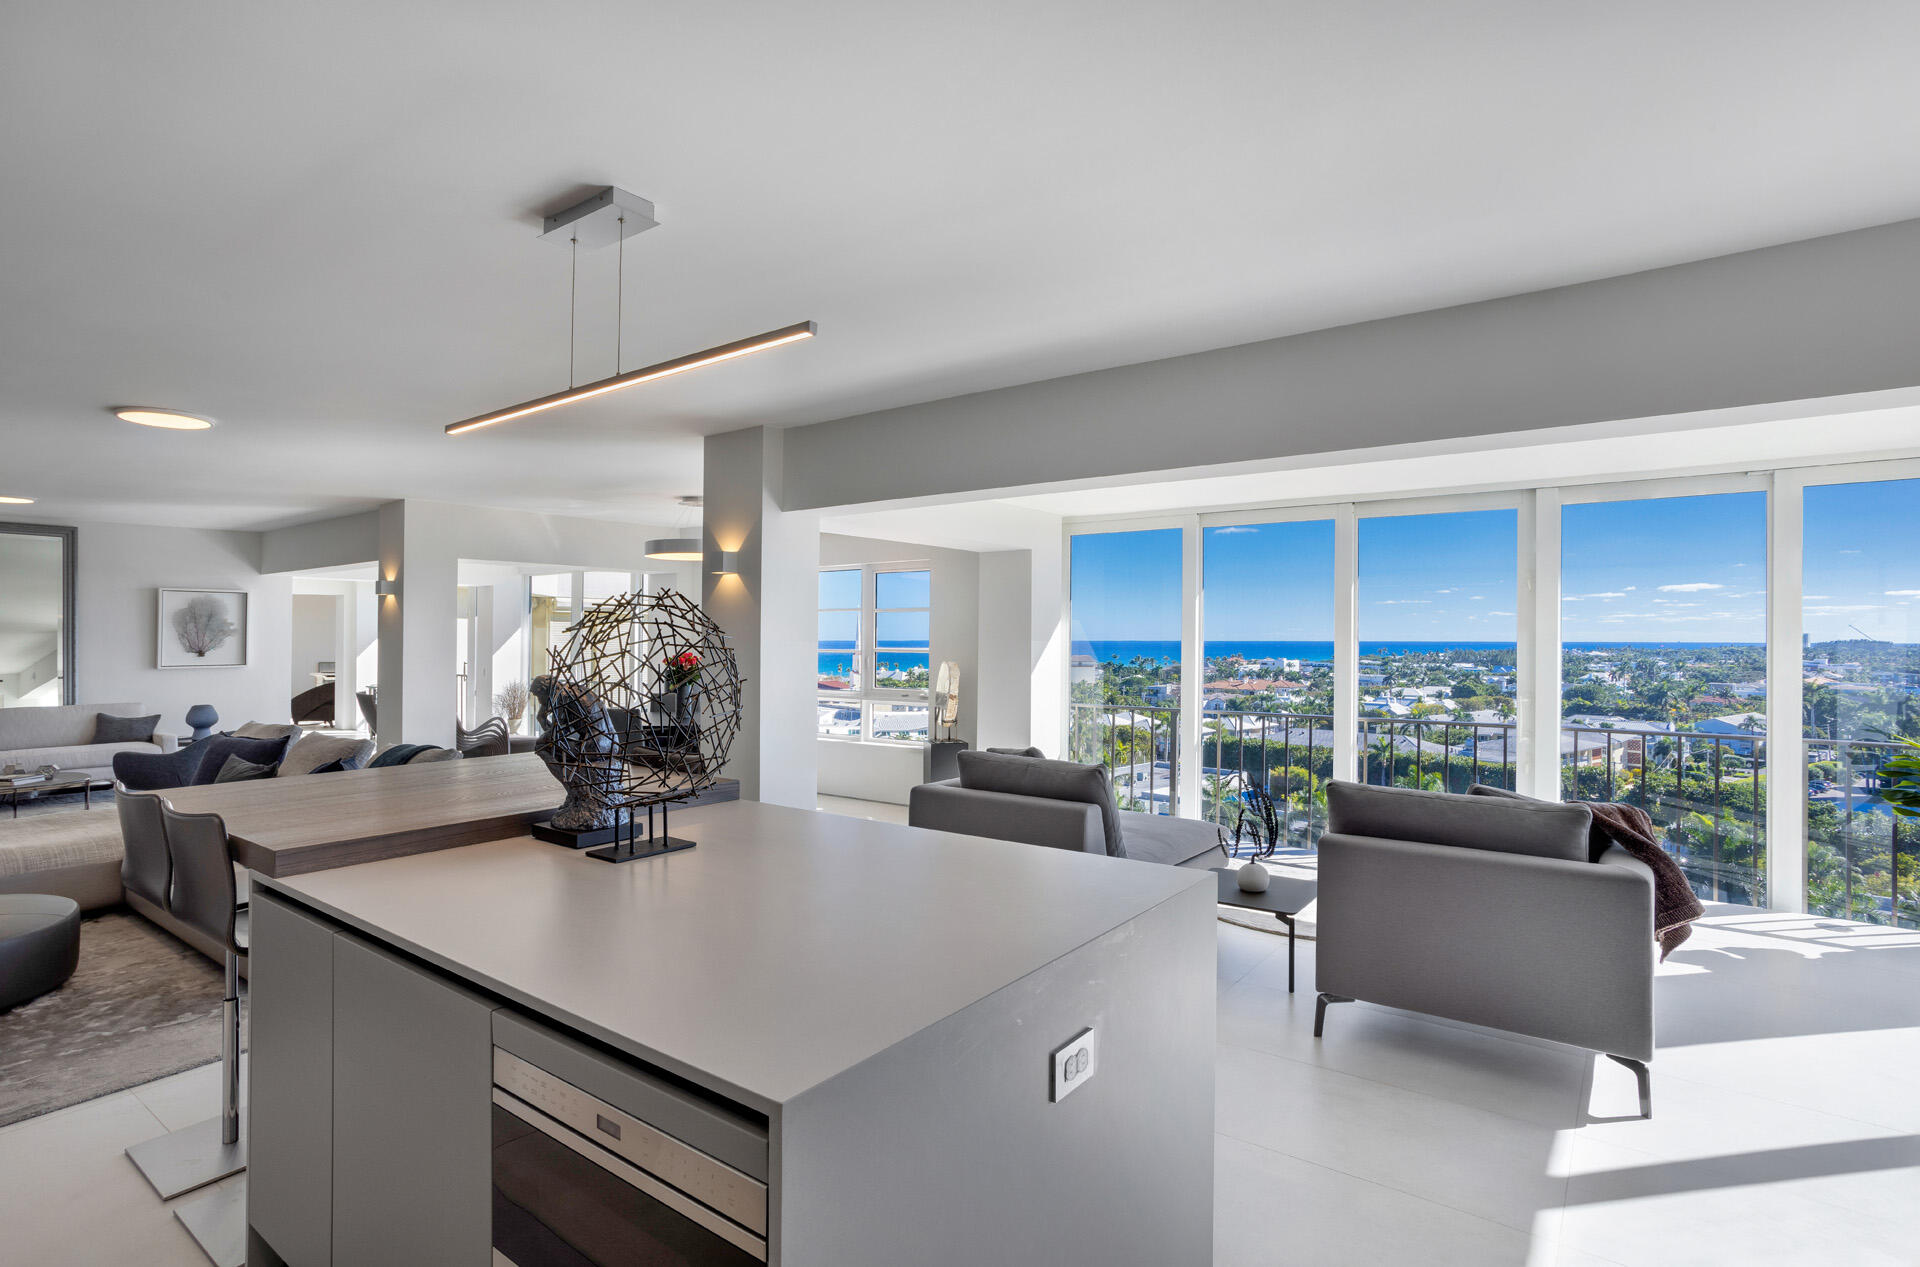 Property for Sale at 50 East Road 11G, Delray Beach, Palm Beach County, Florida - Bedrooms: 5 
Bathrooms: 3  - $3,650,000